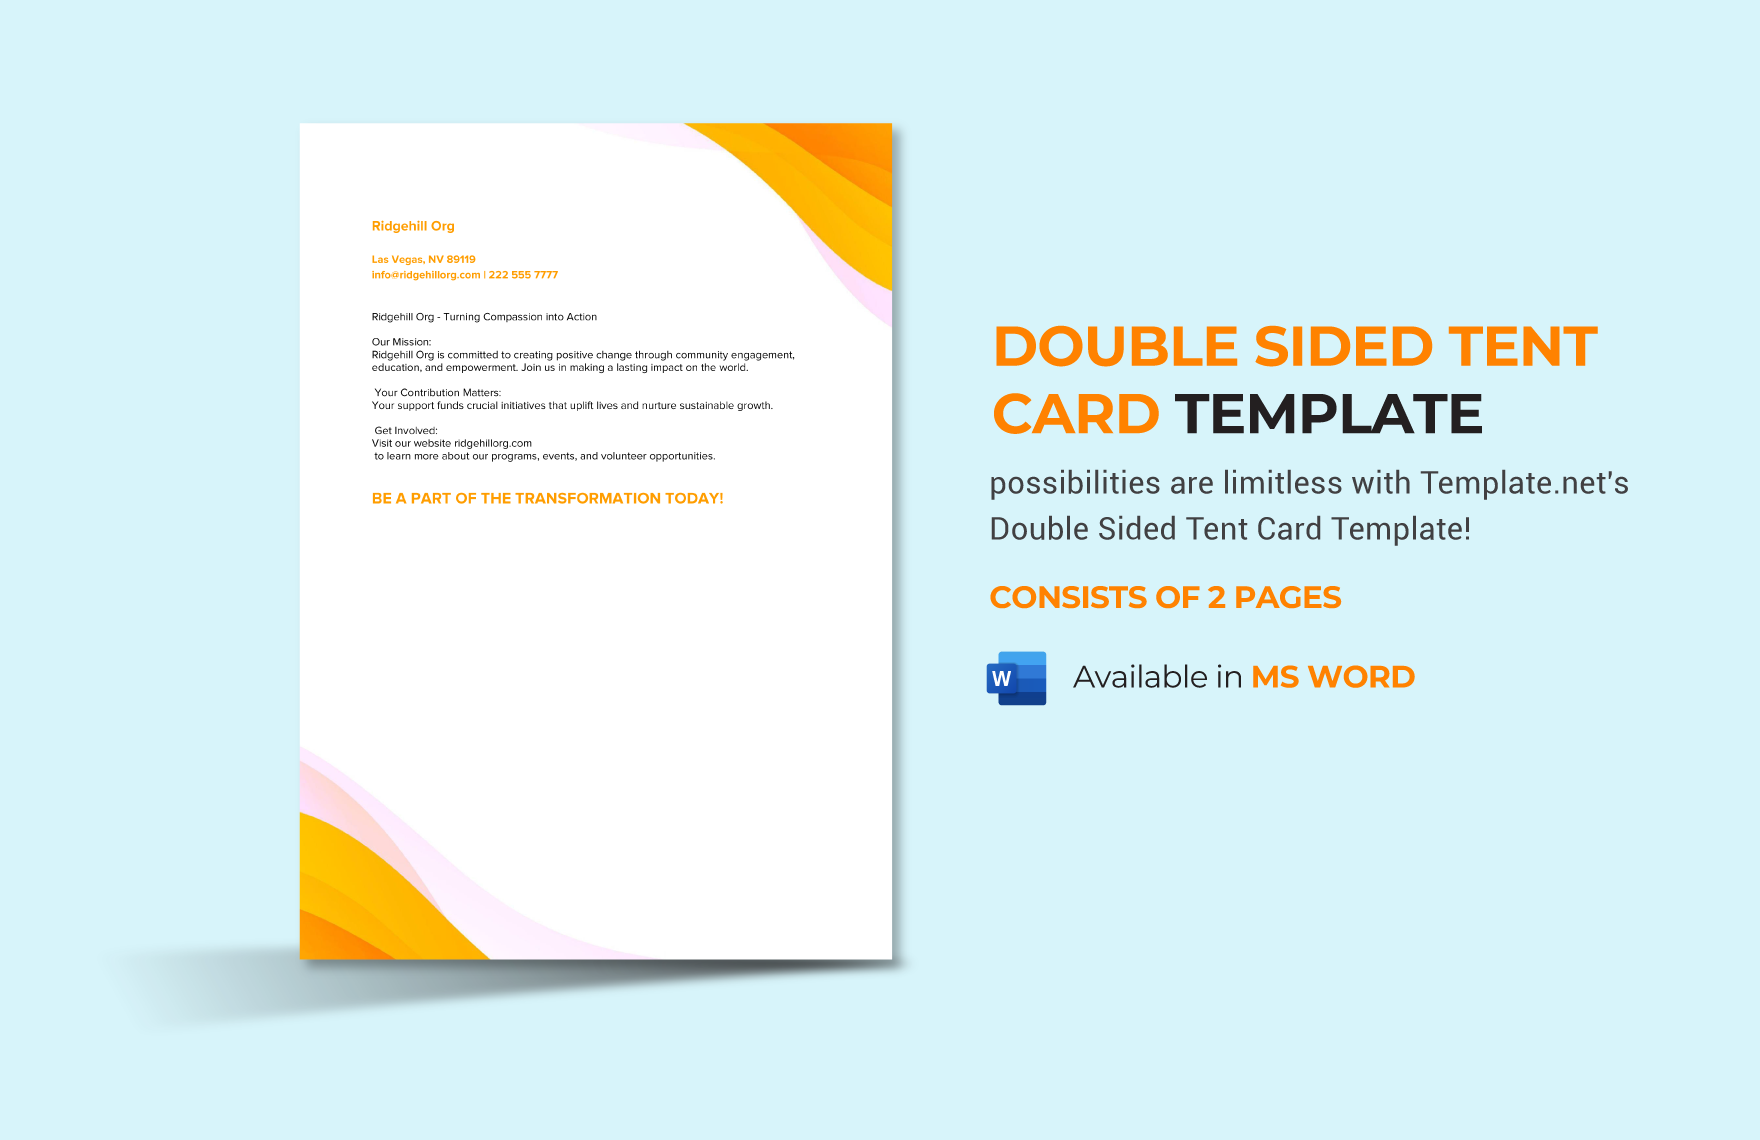 Double Sided Tent Card Template